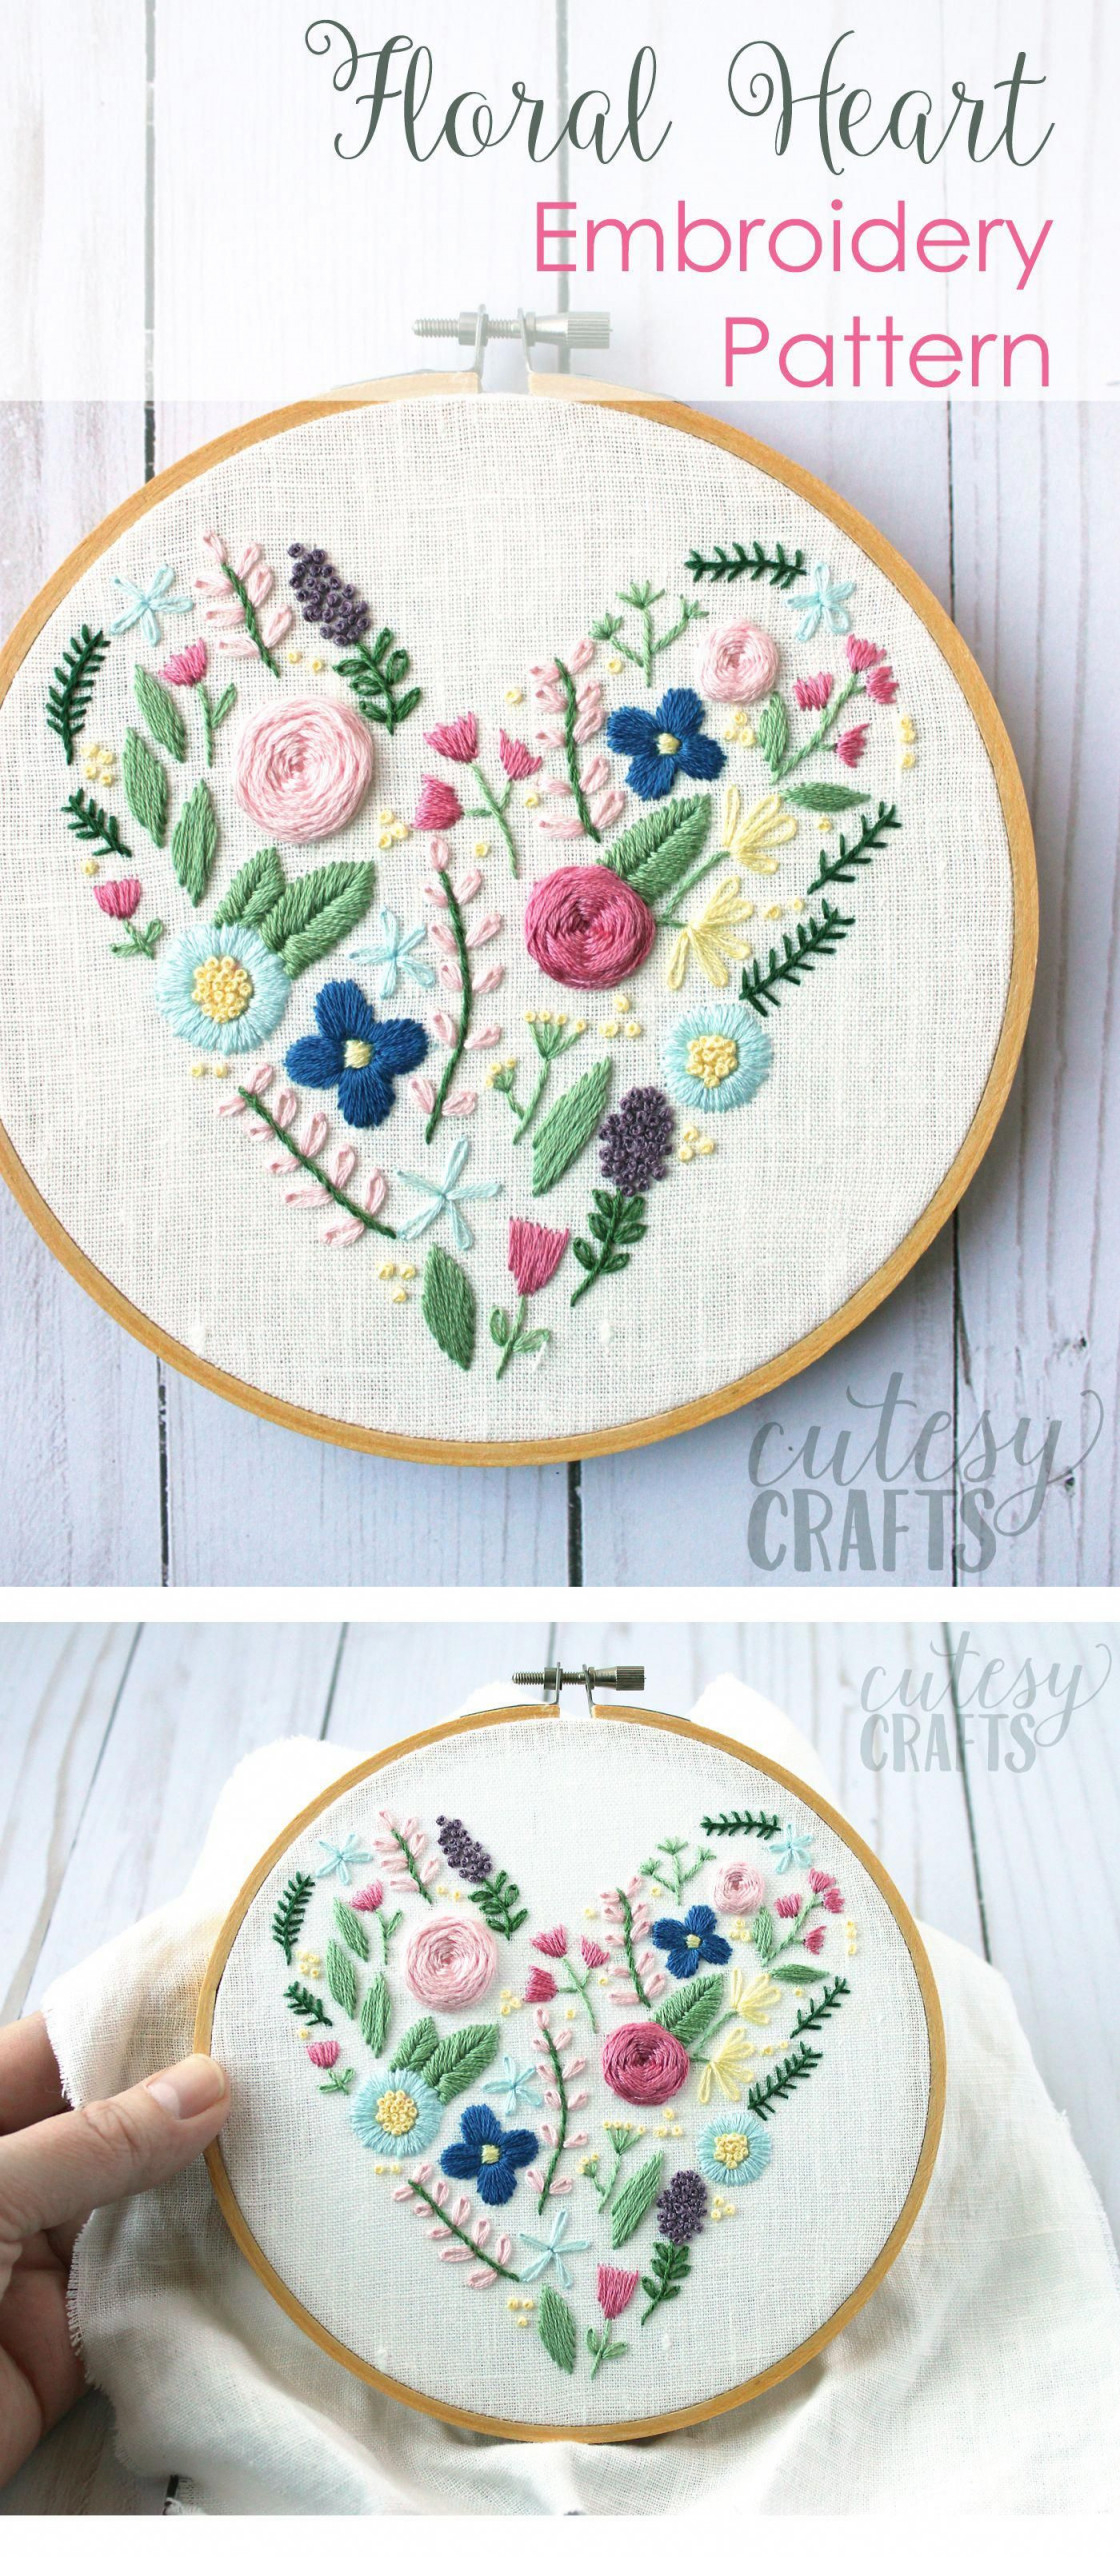 Hand Stitch Embroidery Patterns Free Hand Embroidery Stitches For Beginners Beautiful Learn Hand